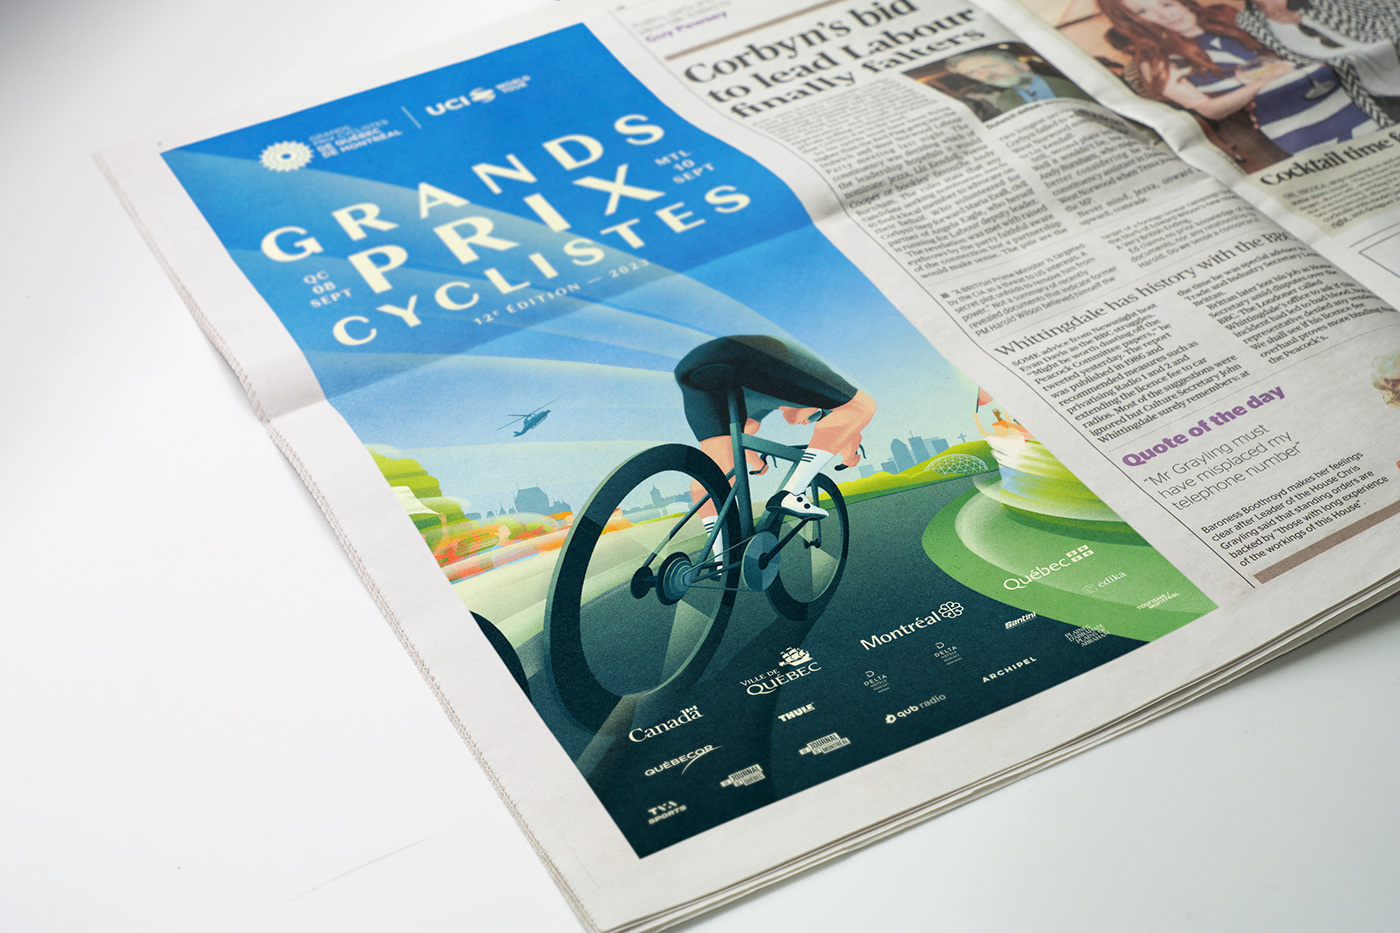 Event sport Cycling Montreal Quebec art direction  poster brand event identity ILLUSTRATION  graphic design 